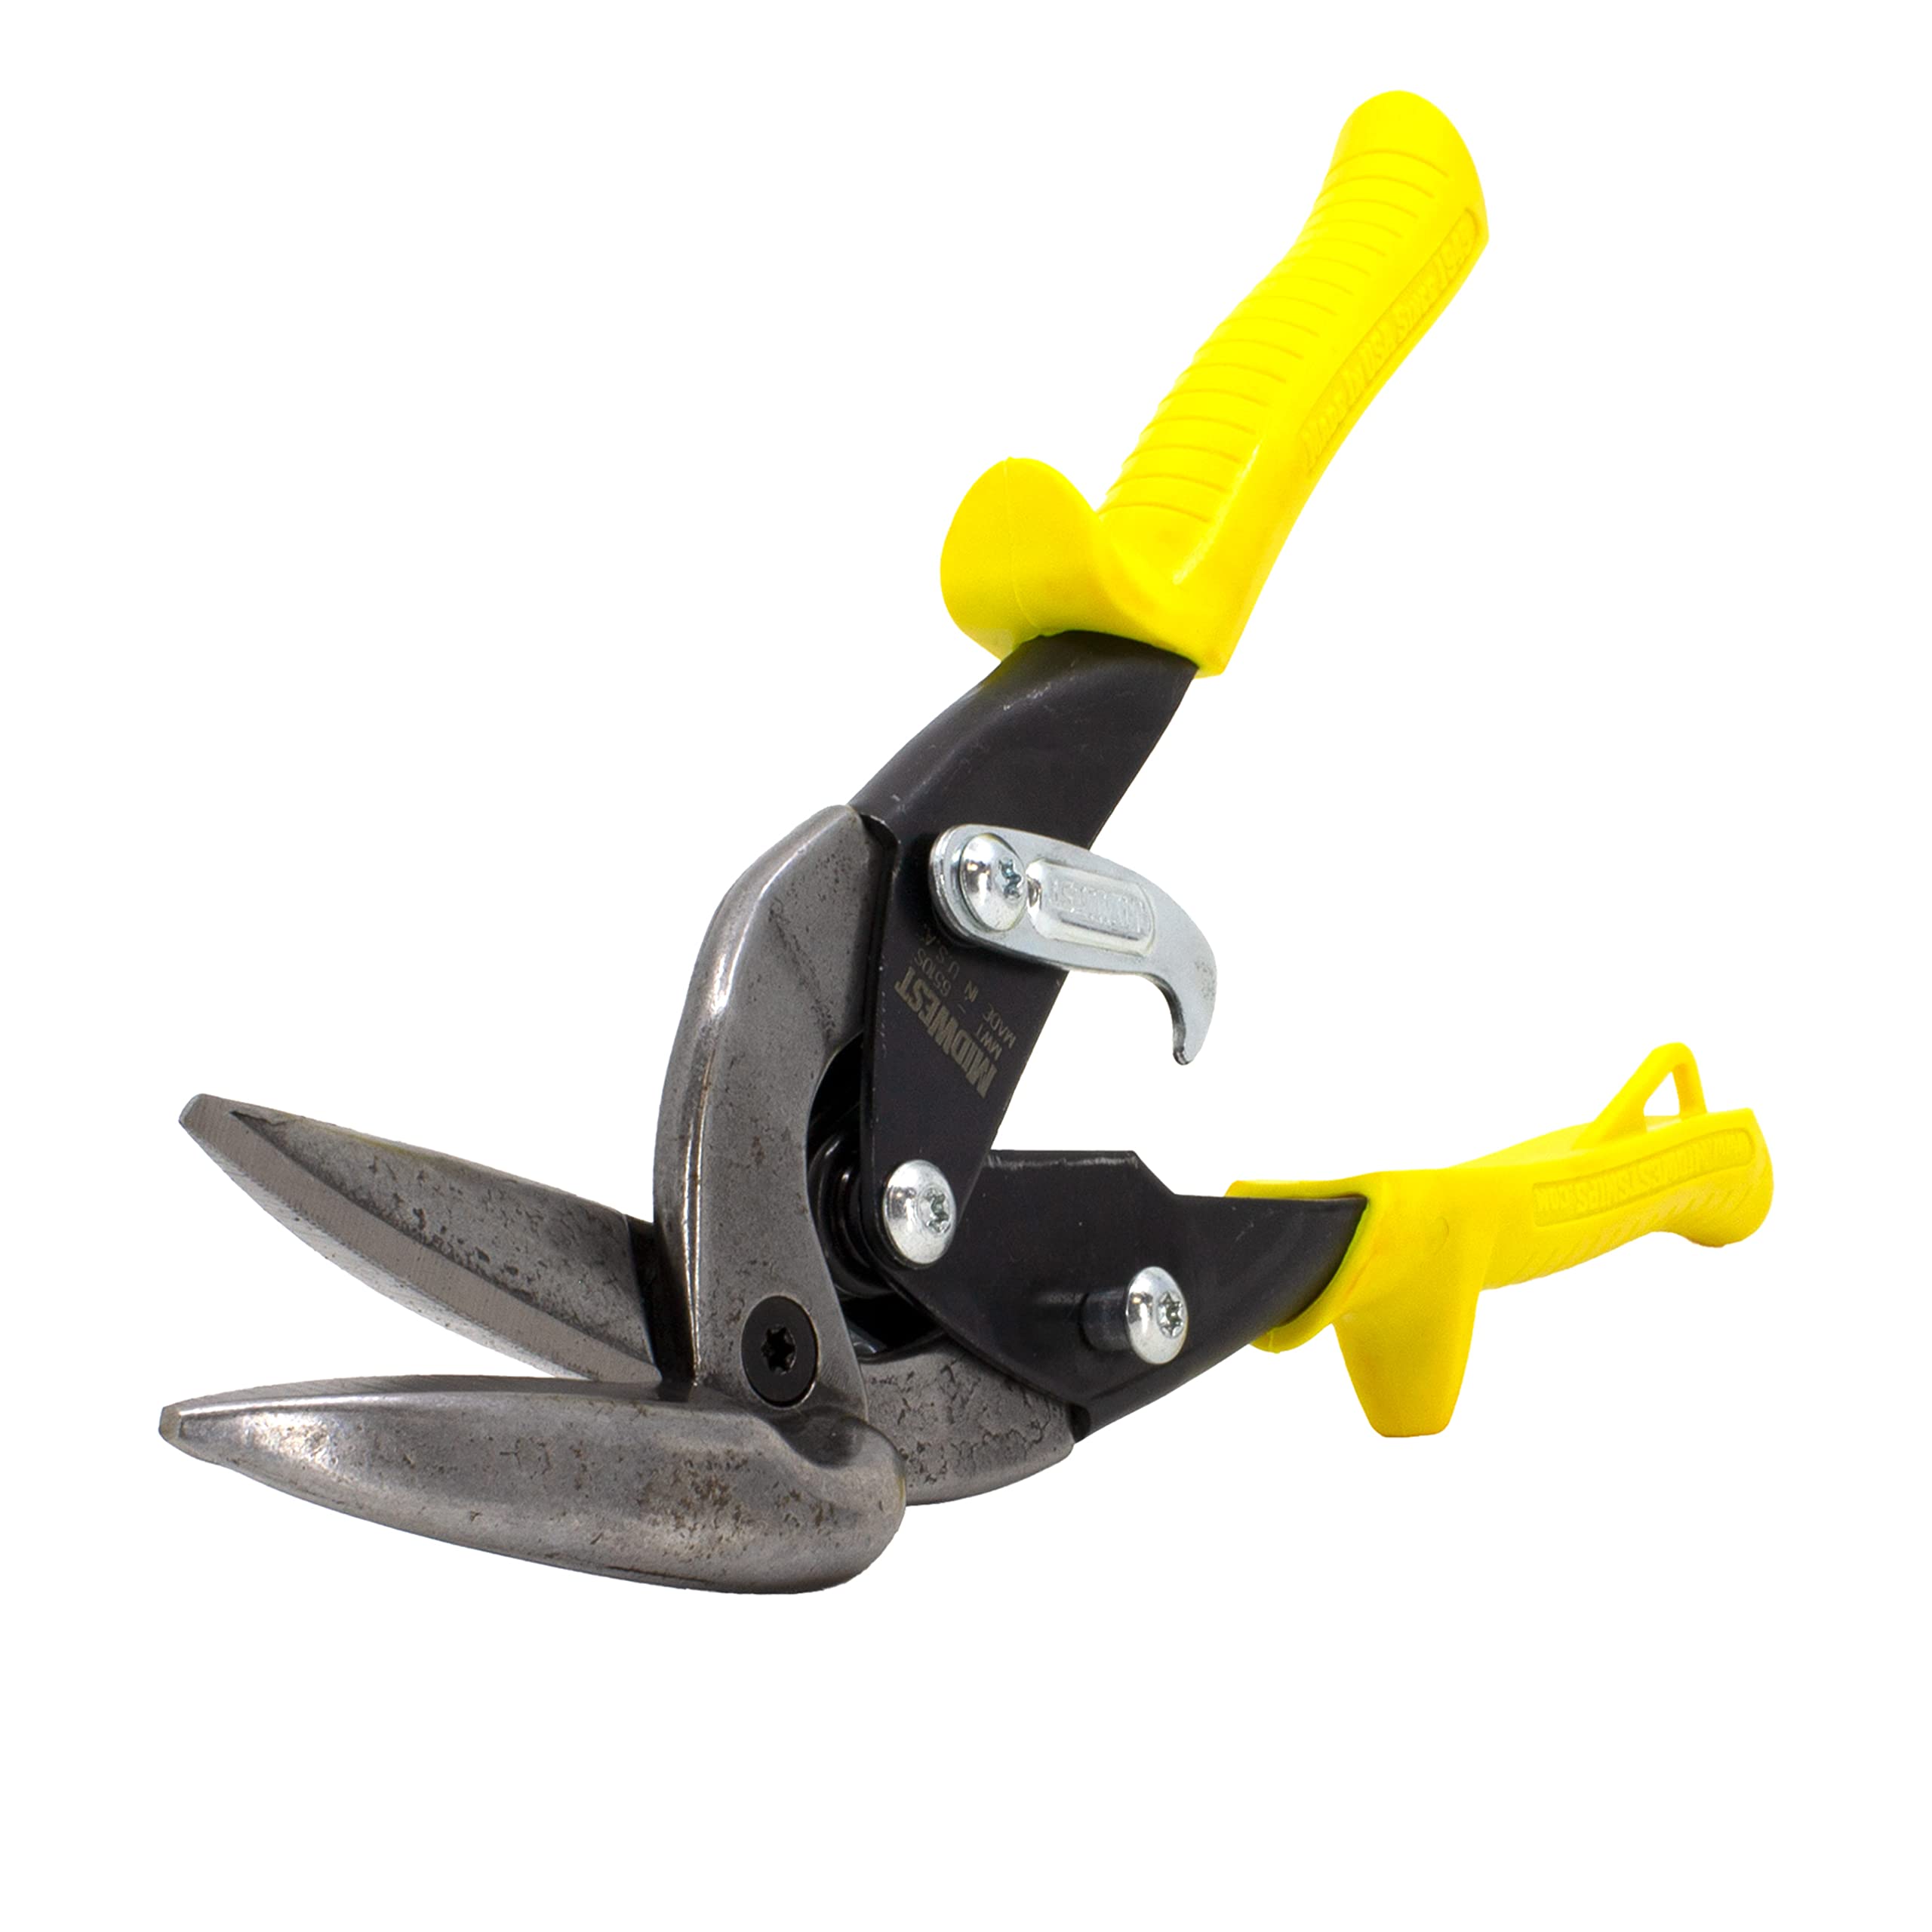 Midwest Snips MIDWEST Aviation Snip - Straight cut Offset Tin cutting Shears with Forged Blade  KUSHN-POWER comfort grips - MWT-6510S